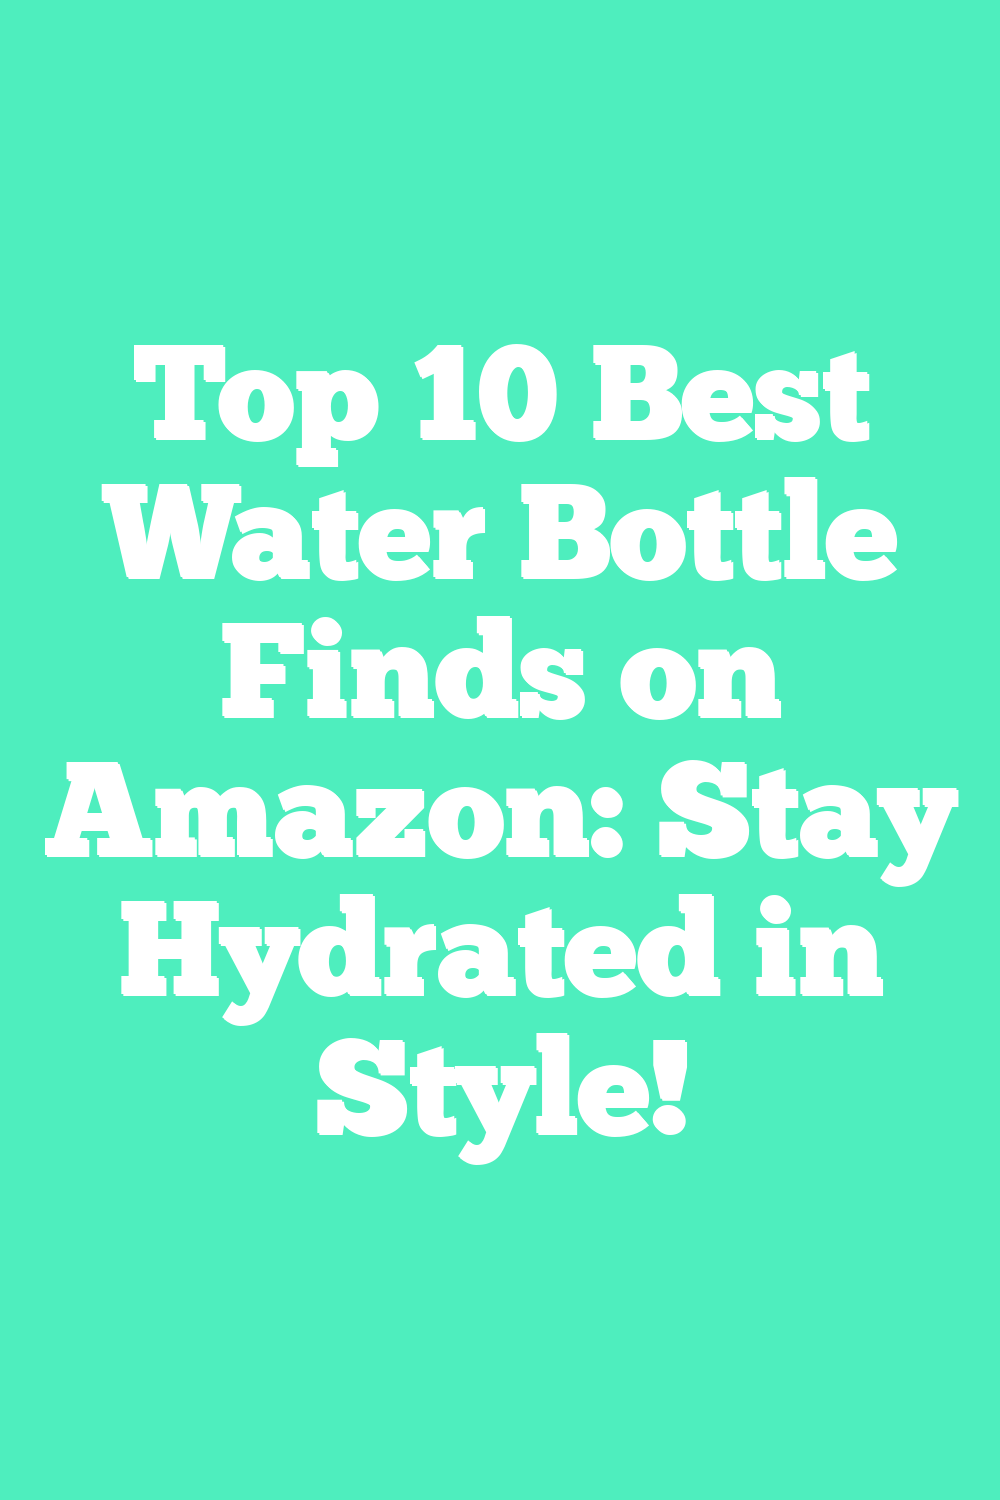 Top 10 Best Water Bottle Finds on Amazon: Stay Hydrated in Style!